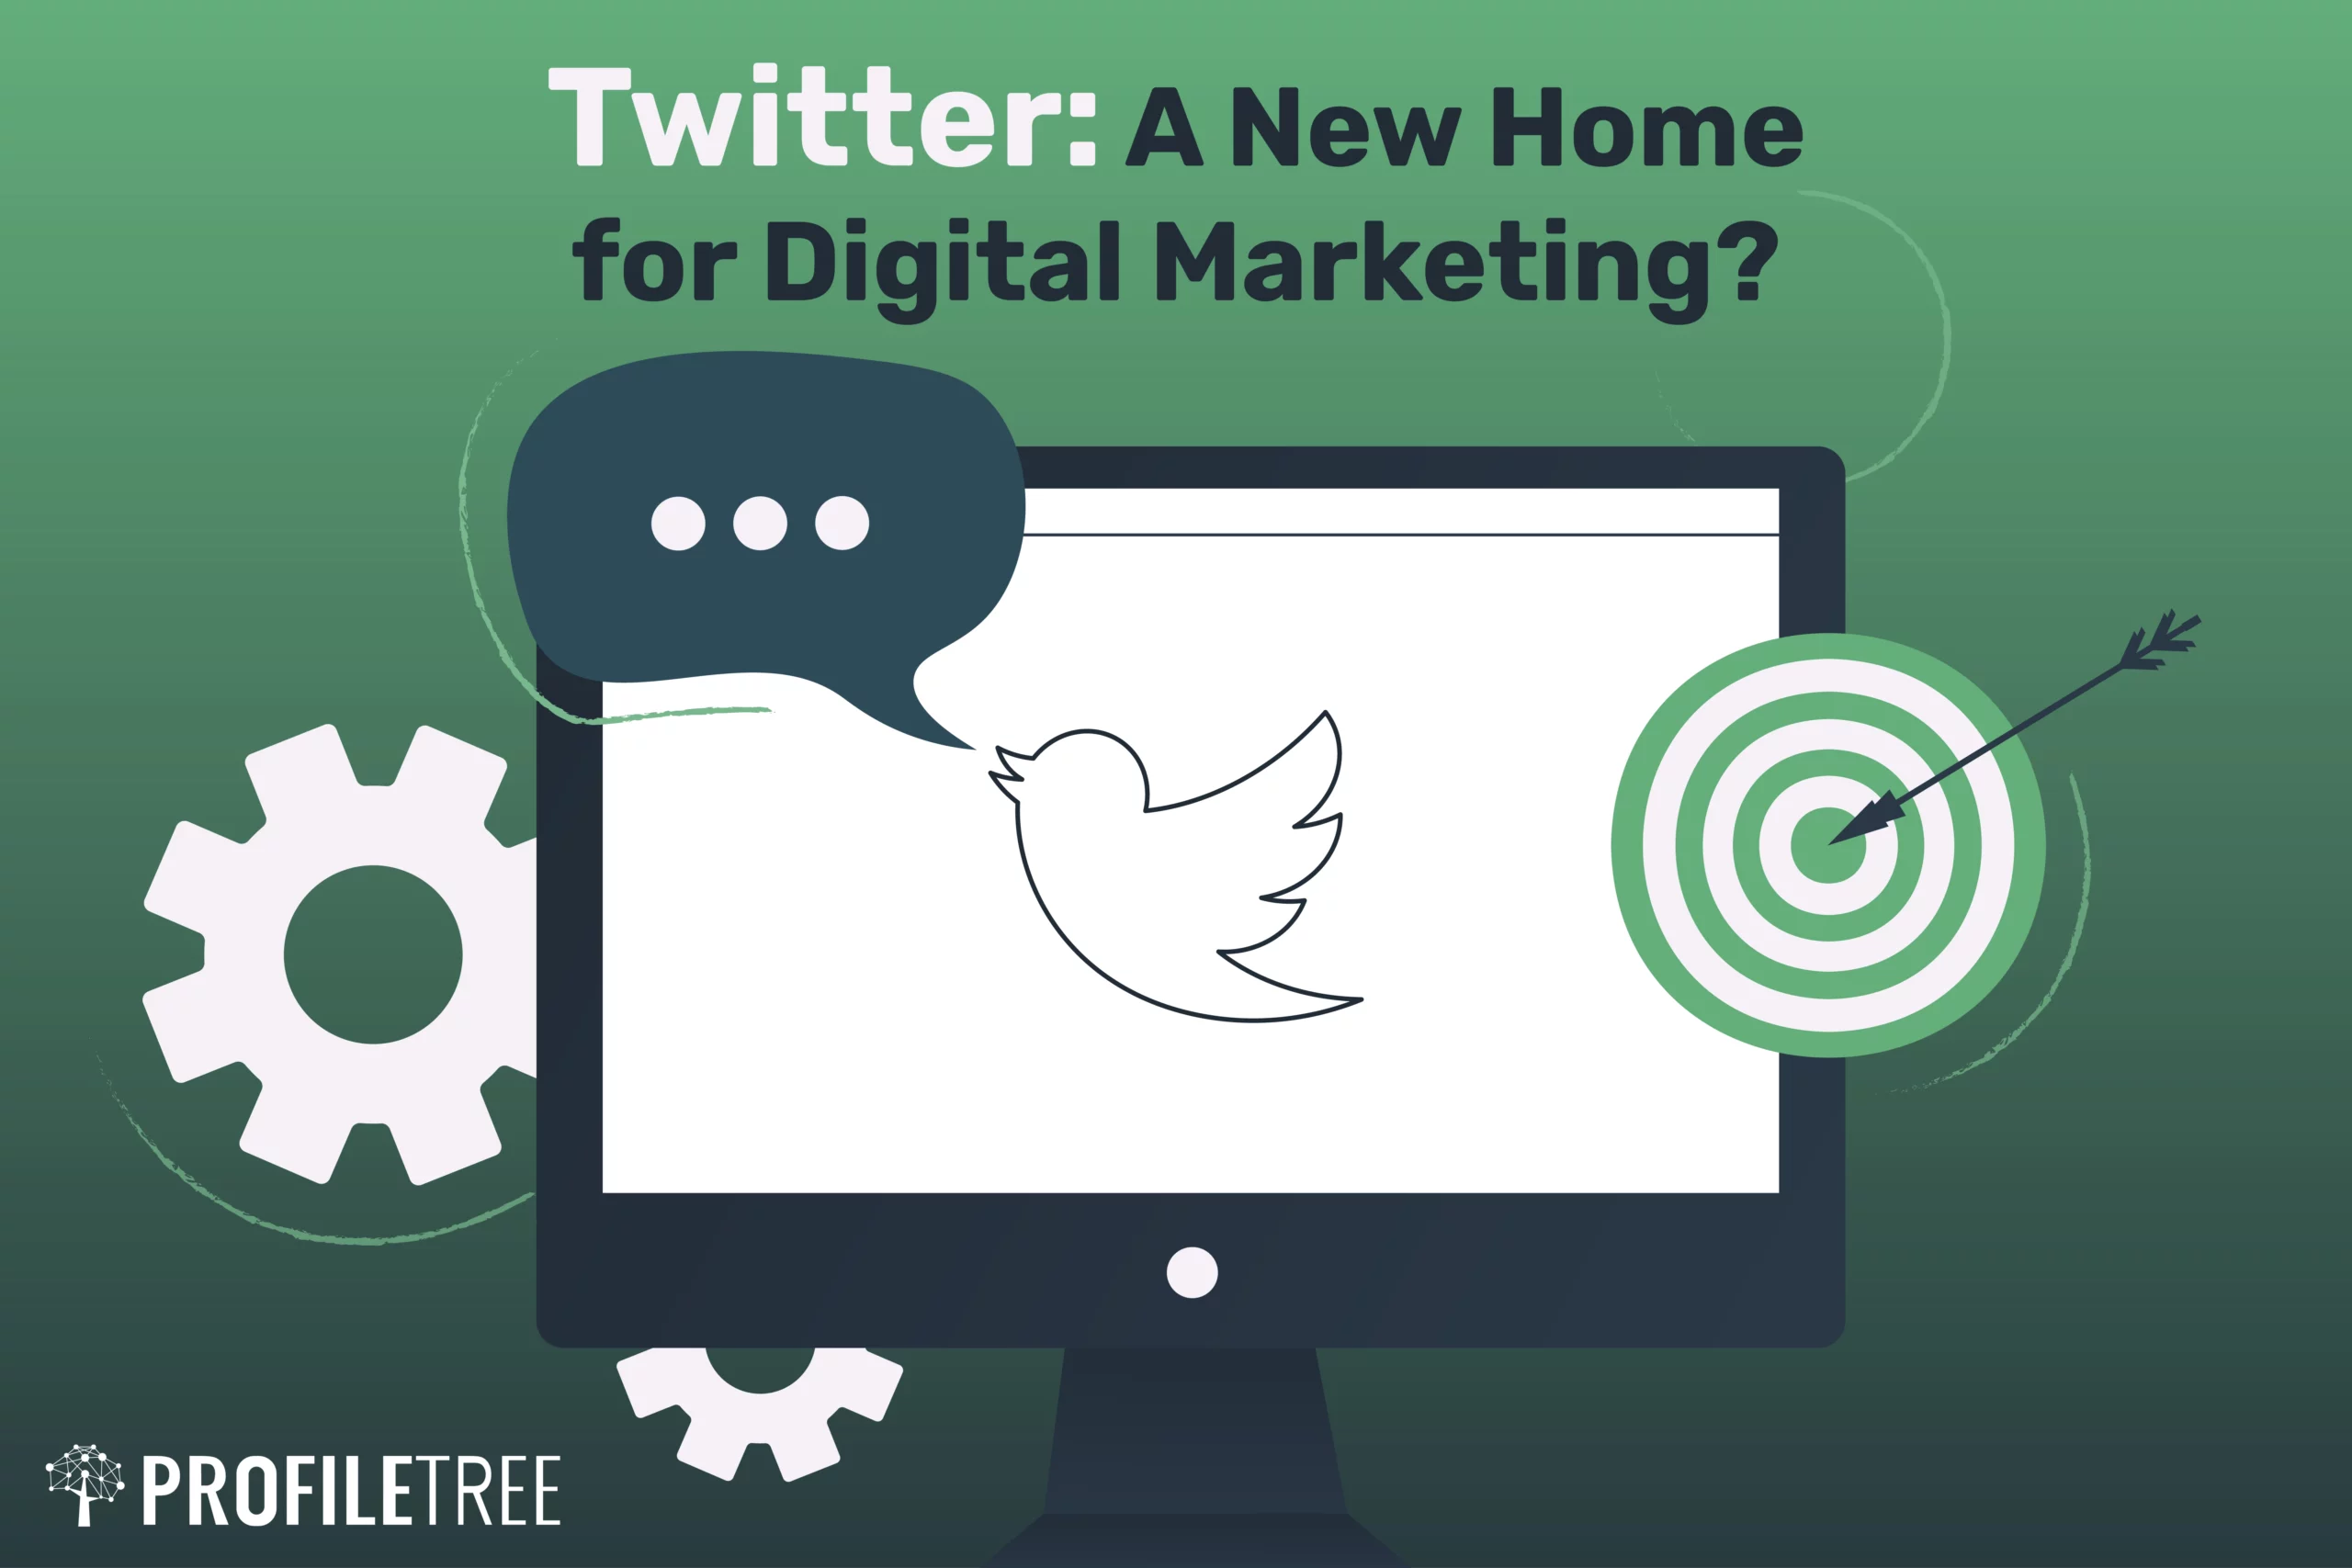 Twitter Is A New Home for Digital Marketing